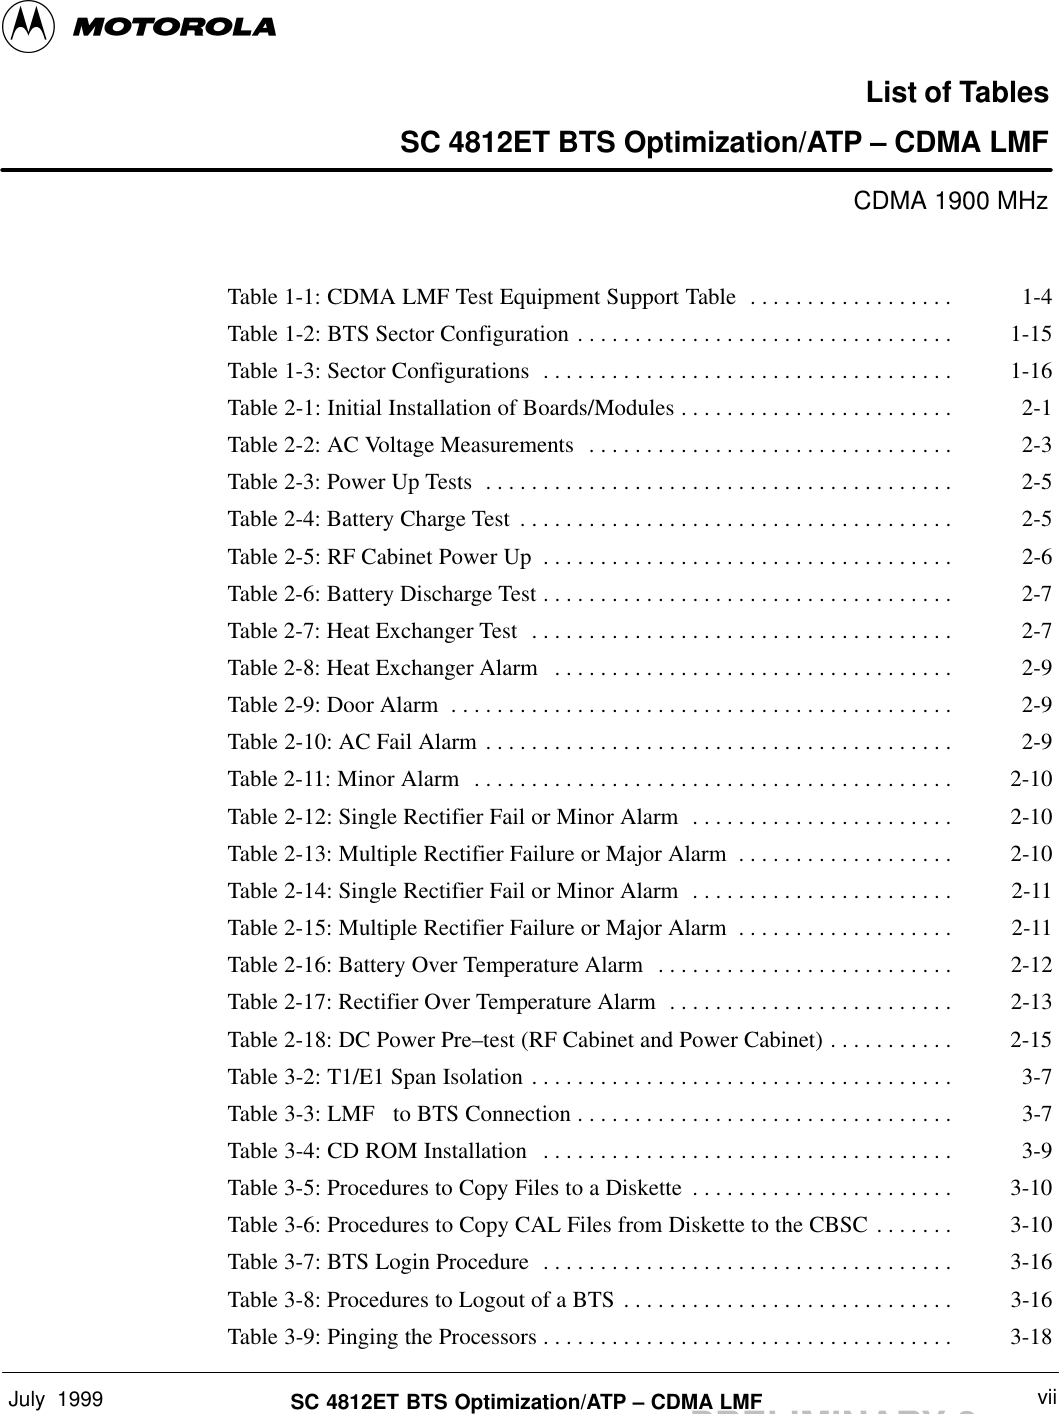 July  1999 viiSC 4812ET BTS Optimization/ATP – CDMA LMFPRELIMINARY 2List of TablesSC 4812ET BTS Optimization/ATP – CDMA LMFCDMA 1900 MHzTable 1-1: CDMA LMF Test Equipment Support Table 1-4. . . . . . . . . . . . . . . . . . Table 1-2: BTS Sector Configuration 1-15. . . . . . . . . . . . . . . . . . . . . . . . . . . . . . . . . Table 1-3: Sector Configurations 1-16. . . . . . . . . . . . . . . . . . . . . . . . . . . . . . . . . . . . Table 2-1: Initial Installation of Boards/Modules 2-1. . . . . . . . . . . . . . . . . . . . . . . . Table 2-2: AC Voltage Measurements 2-3. . . . . . . . . . . . . . . . . . . . . . . . . . . . . . . . Table 2-3: Power Up Tests 2-5. . . . . . . . . . . . . . . . . . . . . . . . . . . . . . . . . . . . . . . . . Table 2-4: Battery Charge Test 2-5. . . . . . . . . . . . . . . . . . . . . . . . . . . . . . . . . . . . . . Table 2-5: RF Cabinet Power Up 2-6. . . . . . . . . . . . . . . . . . . . . . . . . . . . . . . . . . . . Table 2-6: Battery Discharge Test 2-7. . . . . . . . . . . . . . . . . . . . . . . . . . . . . . . . . . . . Table 2-7: Heat Exchanger Test 2-7. . . . . . . . . . . . . . . . . . . . . . . . . . . . . . . . . . . . . Table 2-8: Heat Exchanger Alarm 2-9. . . . . . . . . . . . . . . . . . . . . . . . . . . . . . . . . . . Table 2-9: Door Alarm 2-9. . . . . . . . . . . . . . . . . . . . . . . . . . . . . . . . . . . . . . . . . . . . Table 2-10: AC Fail Alarm 2-9. . . . . . . . . . . . . . . . . . . . . . . . . . . . . . . . . . . . . . . . . Table 2-11: Minor Alarm 2-10. . . . . . . . . . . . . . . . . . . . . . . . . . . . . . . . . . . . . . . . . . Table 2-12: Single Rectifier Fail or Minor Alarm 2-10. . . . . . . . . . . . . . . . . . . . . . . Table 2-13: Multiple Rectifier Failure or Major Alarm 2-10. . . . . . . . . . . . . . . . . . . Table 2-14: Single Rectifier Fail or Minor Alarm 2-11. . . . . . . . . . . . . . . . . . . . . . . Table 2-15: Multiple Rectifier Failure or Major Alarm 2-11. . . . . . . . . . . . . . . . . . . Table 2-16: Battery Over Temperature Alarm 2-12. . . . . . . . . . . . . . . . . . . . . . . . . . Table 2-17: Rectifier Over Temperature Alarm 2-13. . . . . . . . . . . . . . . . . . . . . . . . . Table 2-18: DC Power Pre–test (RF Cabinet and Power Cabinet) 2-15. . . . . . . . . . . Table 3-2: T1/E1 Span Isolation 3-7. . . . . . . . . . . . . . . . . . . . . . . . . . . . . . . . . . . . . Table 3-3: LMF   to BTS Connection 3-7. . . . . . . . . . . . . . . . . . . . . . . . . . . . . . . . . Table 3-4: CD ROM Installation 3-9. . . . . . . . . . . . . . . . . . . . . . . . . . . . . . . . . . . . Table 3-5: Procedures to Copy Files to a Diskette 3-10. . . . . . . . . . . . . . . . . . . . . . . Table 3-6: Procedures to Copy CAL Files from Diskette to the CBSC 3-10. . . . . . . Table 3-7: BTS Login Procedure 3-16. . . . . . . . . . . . . . . . . . . . . . . . . . . . . . . . . . . . Table 3-8: Procedures to Logout of a BTS 3-16. . . . . . . . . . . . . . . . . . . . . . . . . . . . . Table 3-9: Pinging the Processors 3-18. . . . . . . . . . . . . . . . . . . . . . . . . . . . . . . . . . . . 